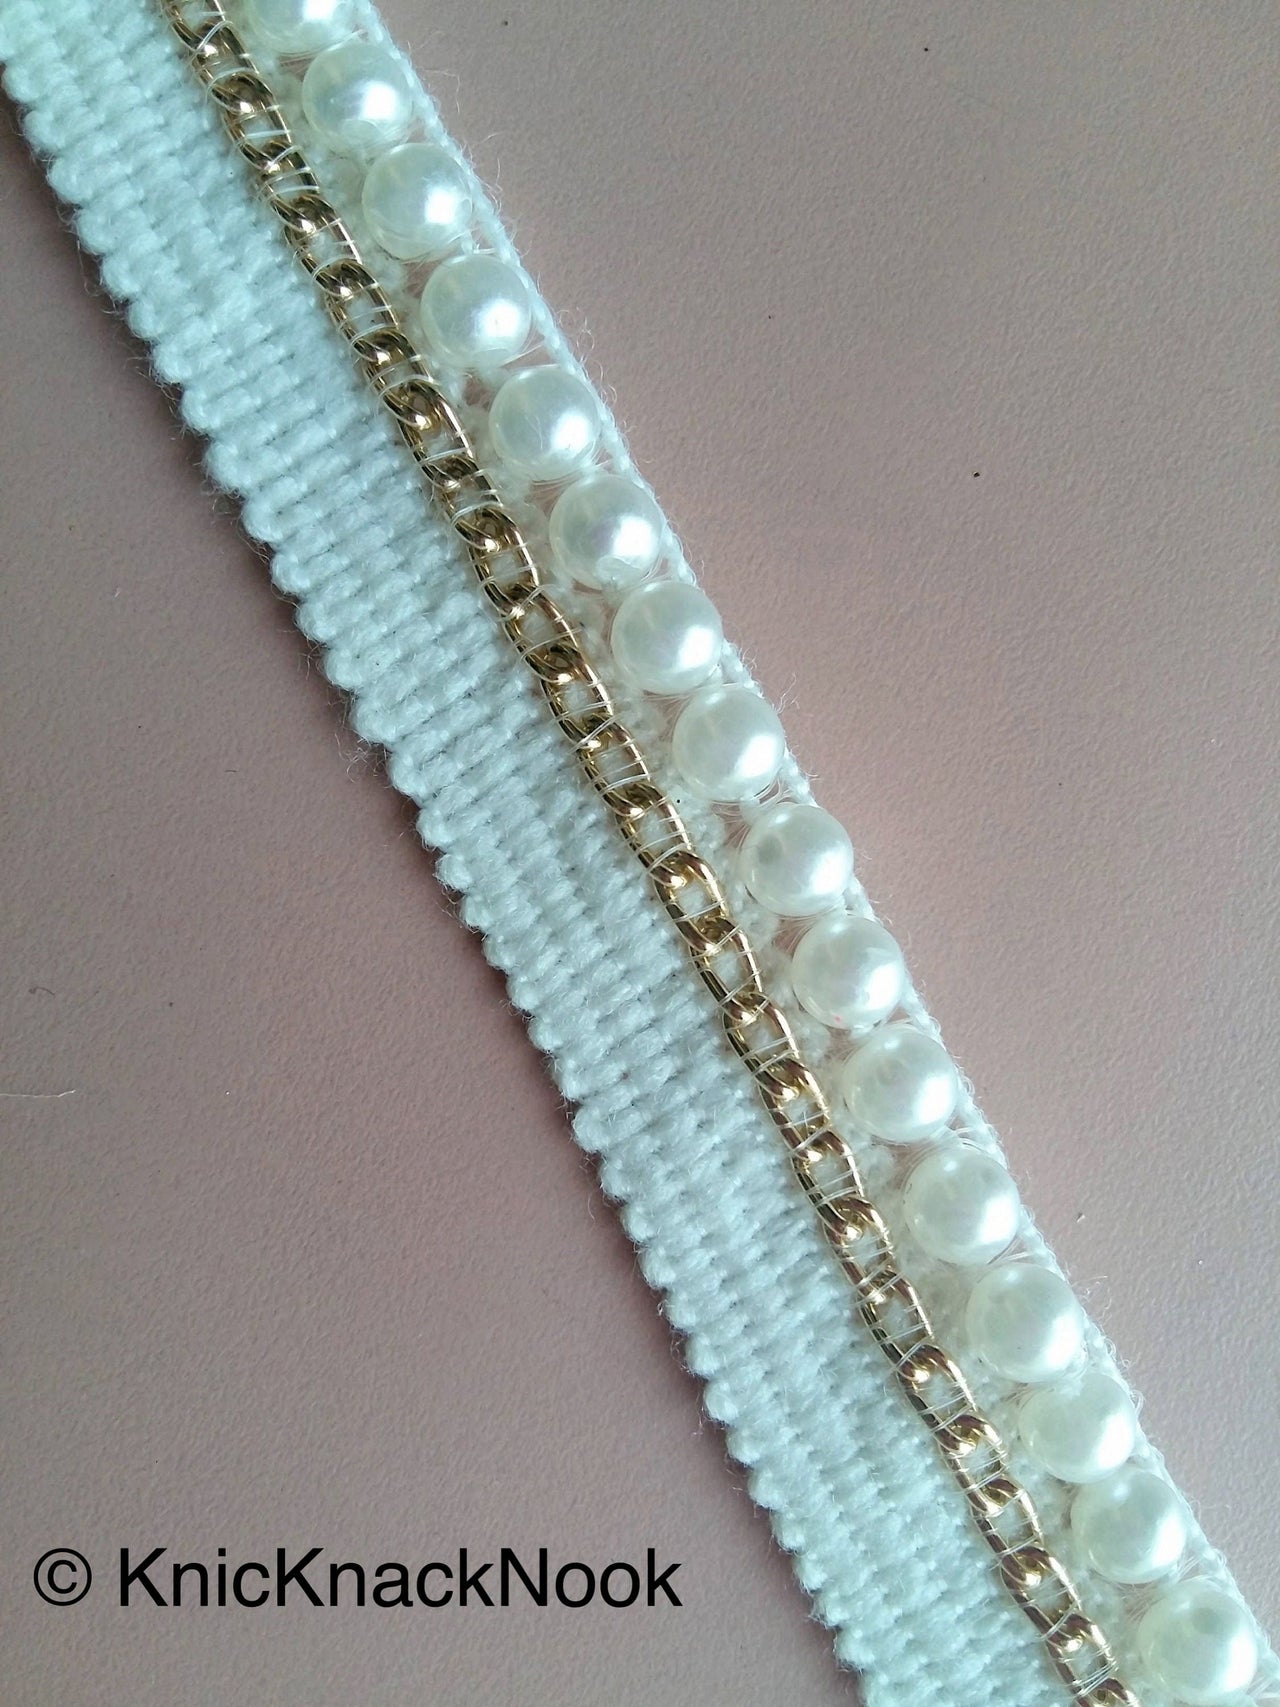 White Pearl Embellishments On White Cotton And Gold Threaded Trim, Dyeable Trim, Approx. 20 mm wide - 200317L105